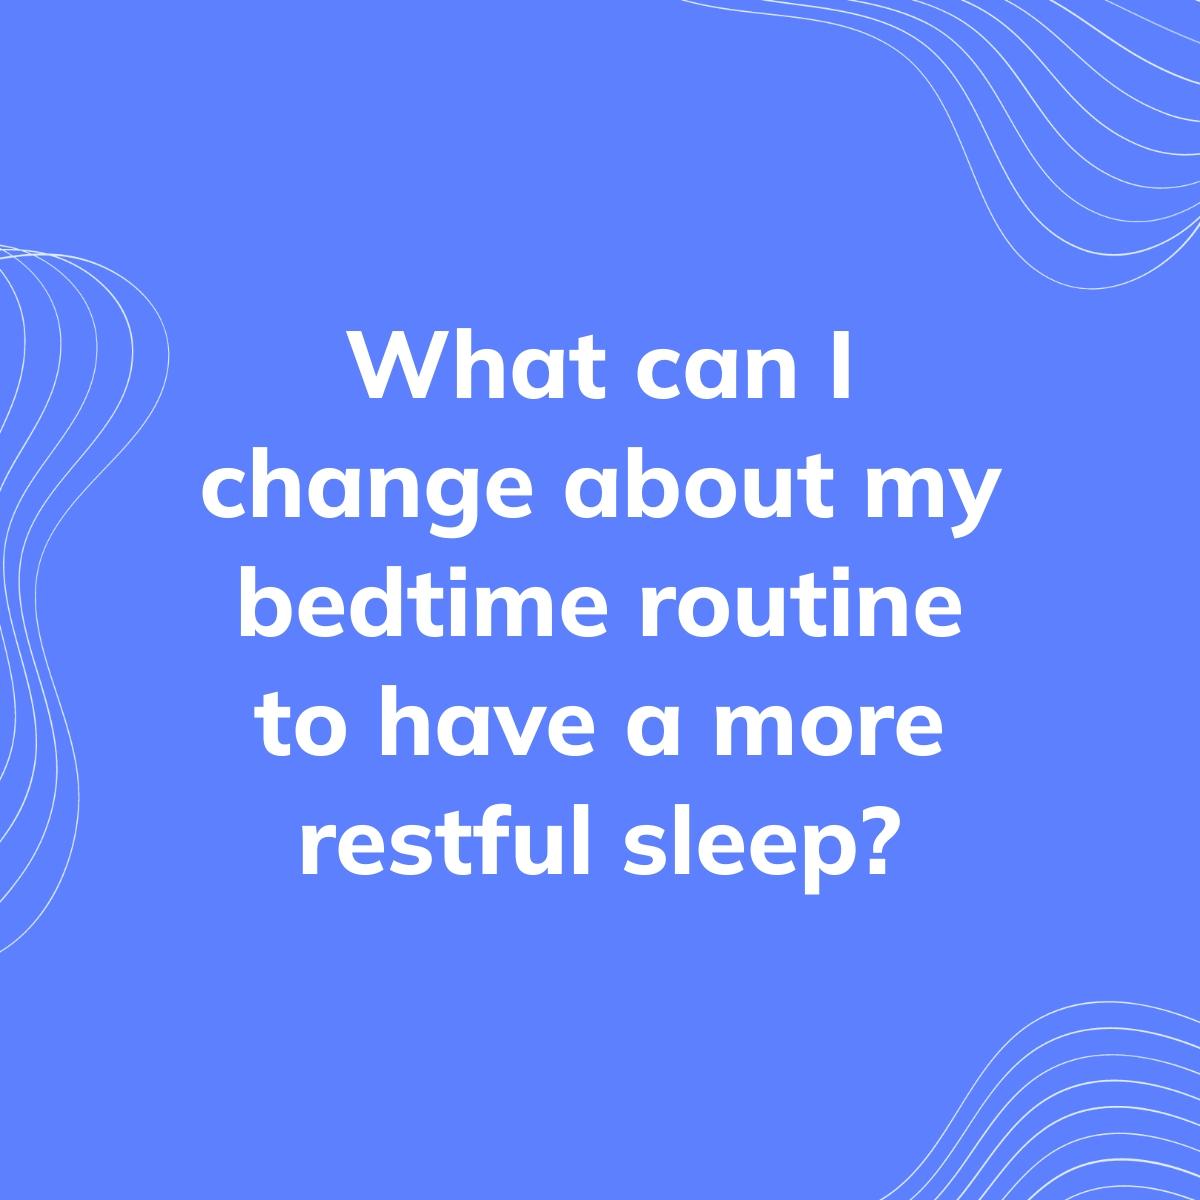 Journal Prompt: What can I change about my bedtime routine to have a more restful sleep?